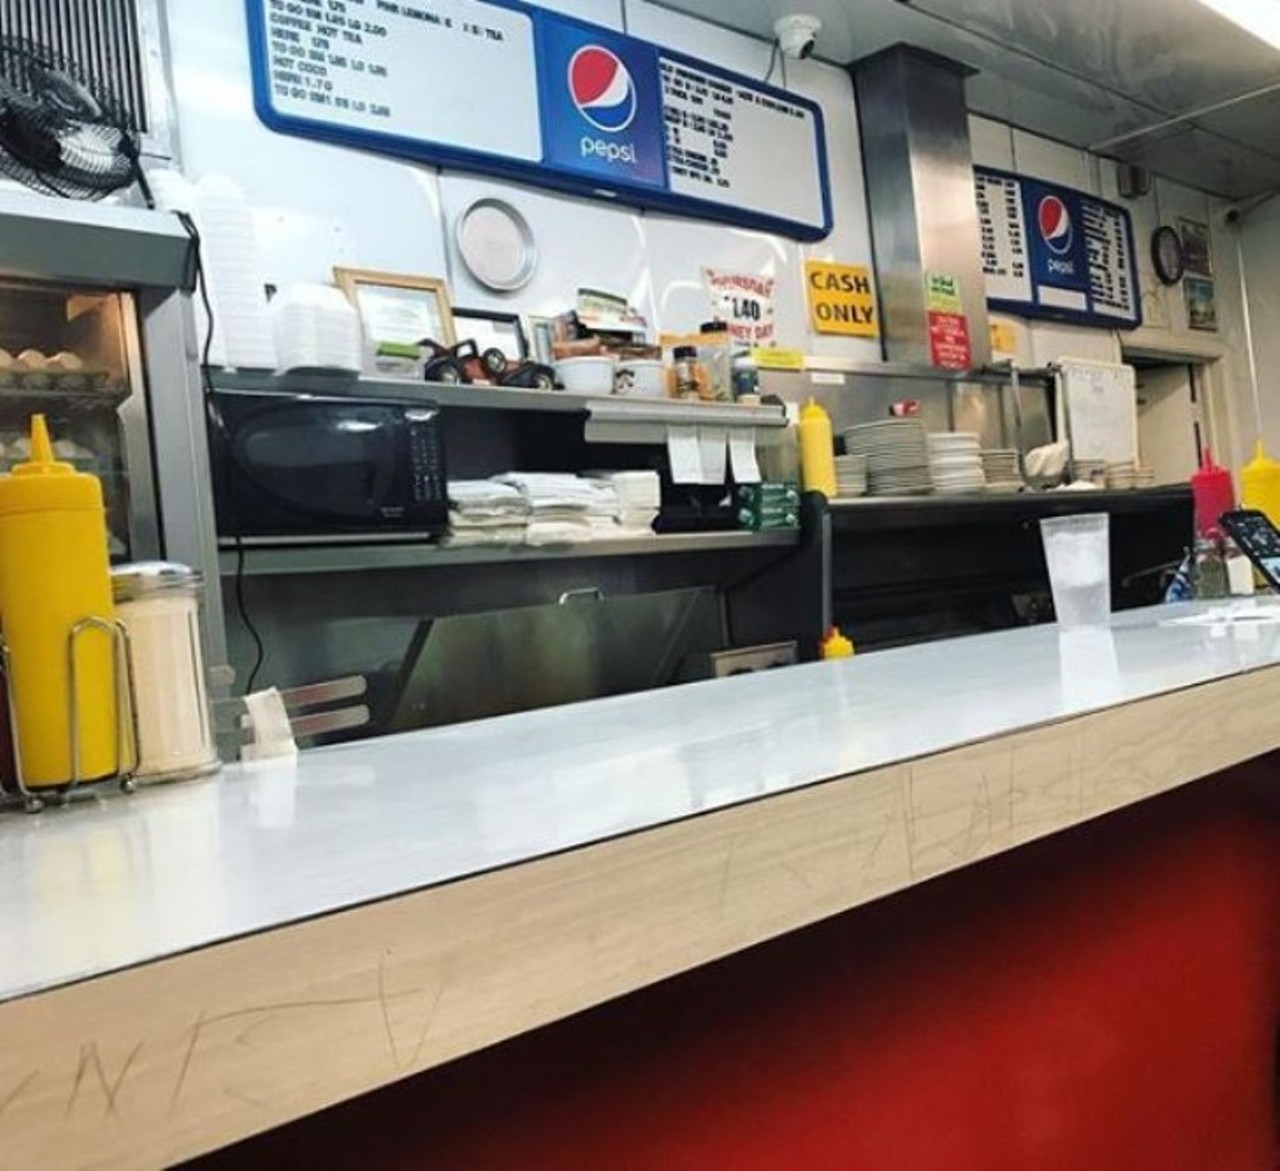 Carter&#146;s Restaurant
22990 Outer Dr.; Dearborn; 313-277-9033
After you&#146;ve had a long night to drink, these late-night burgers and milkshakes are sure to hit the spot at this classic Dearborn joint.
Photo courtesy of Instagram user ranklechick